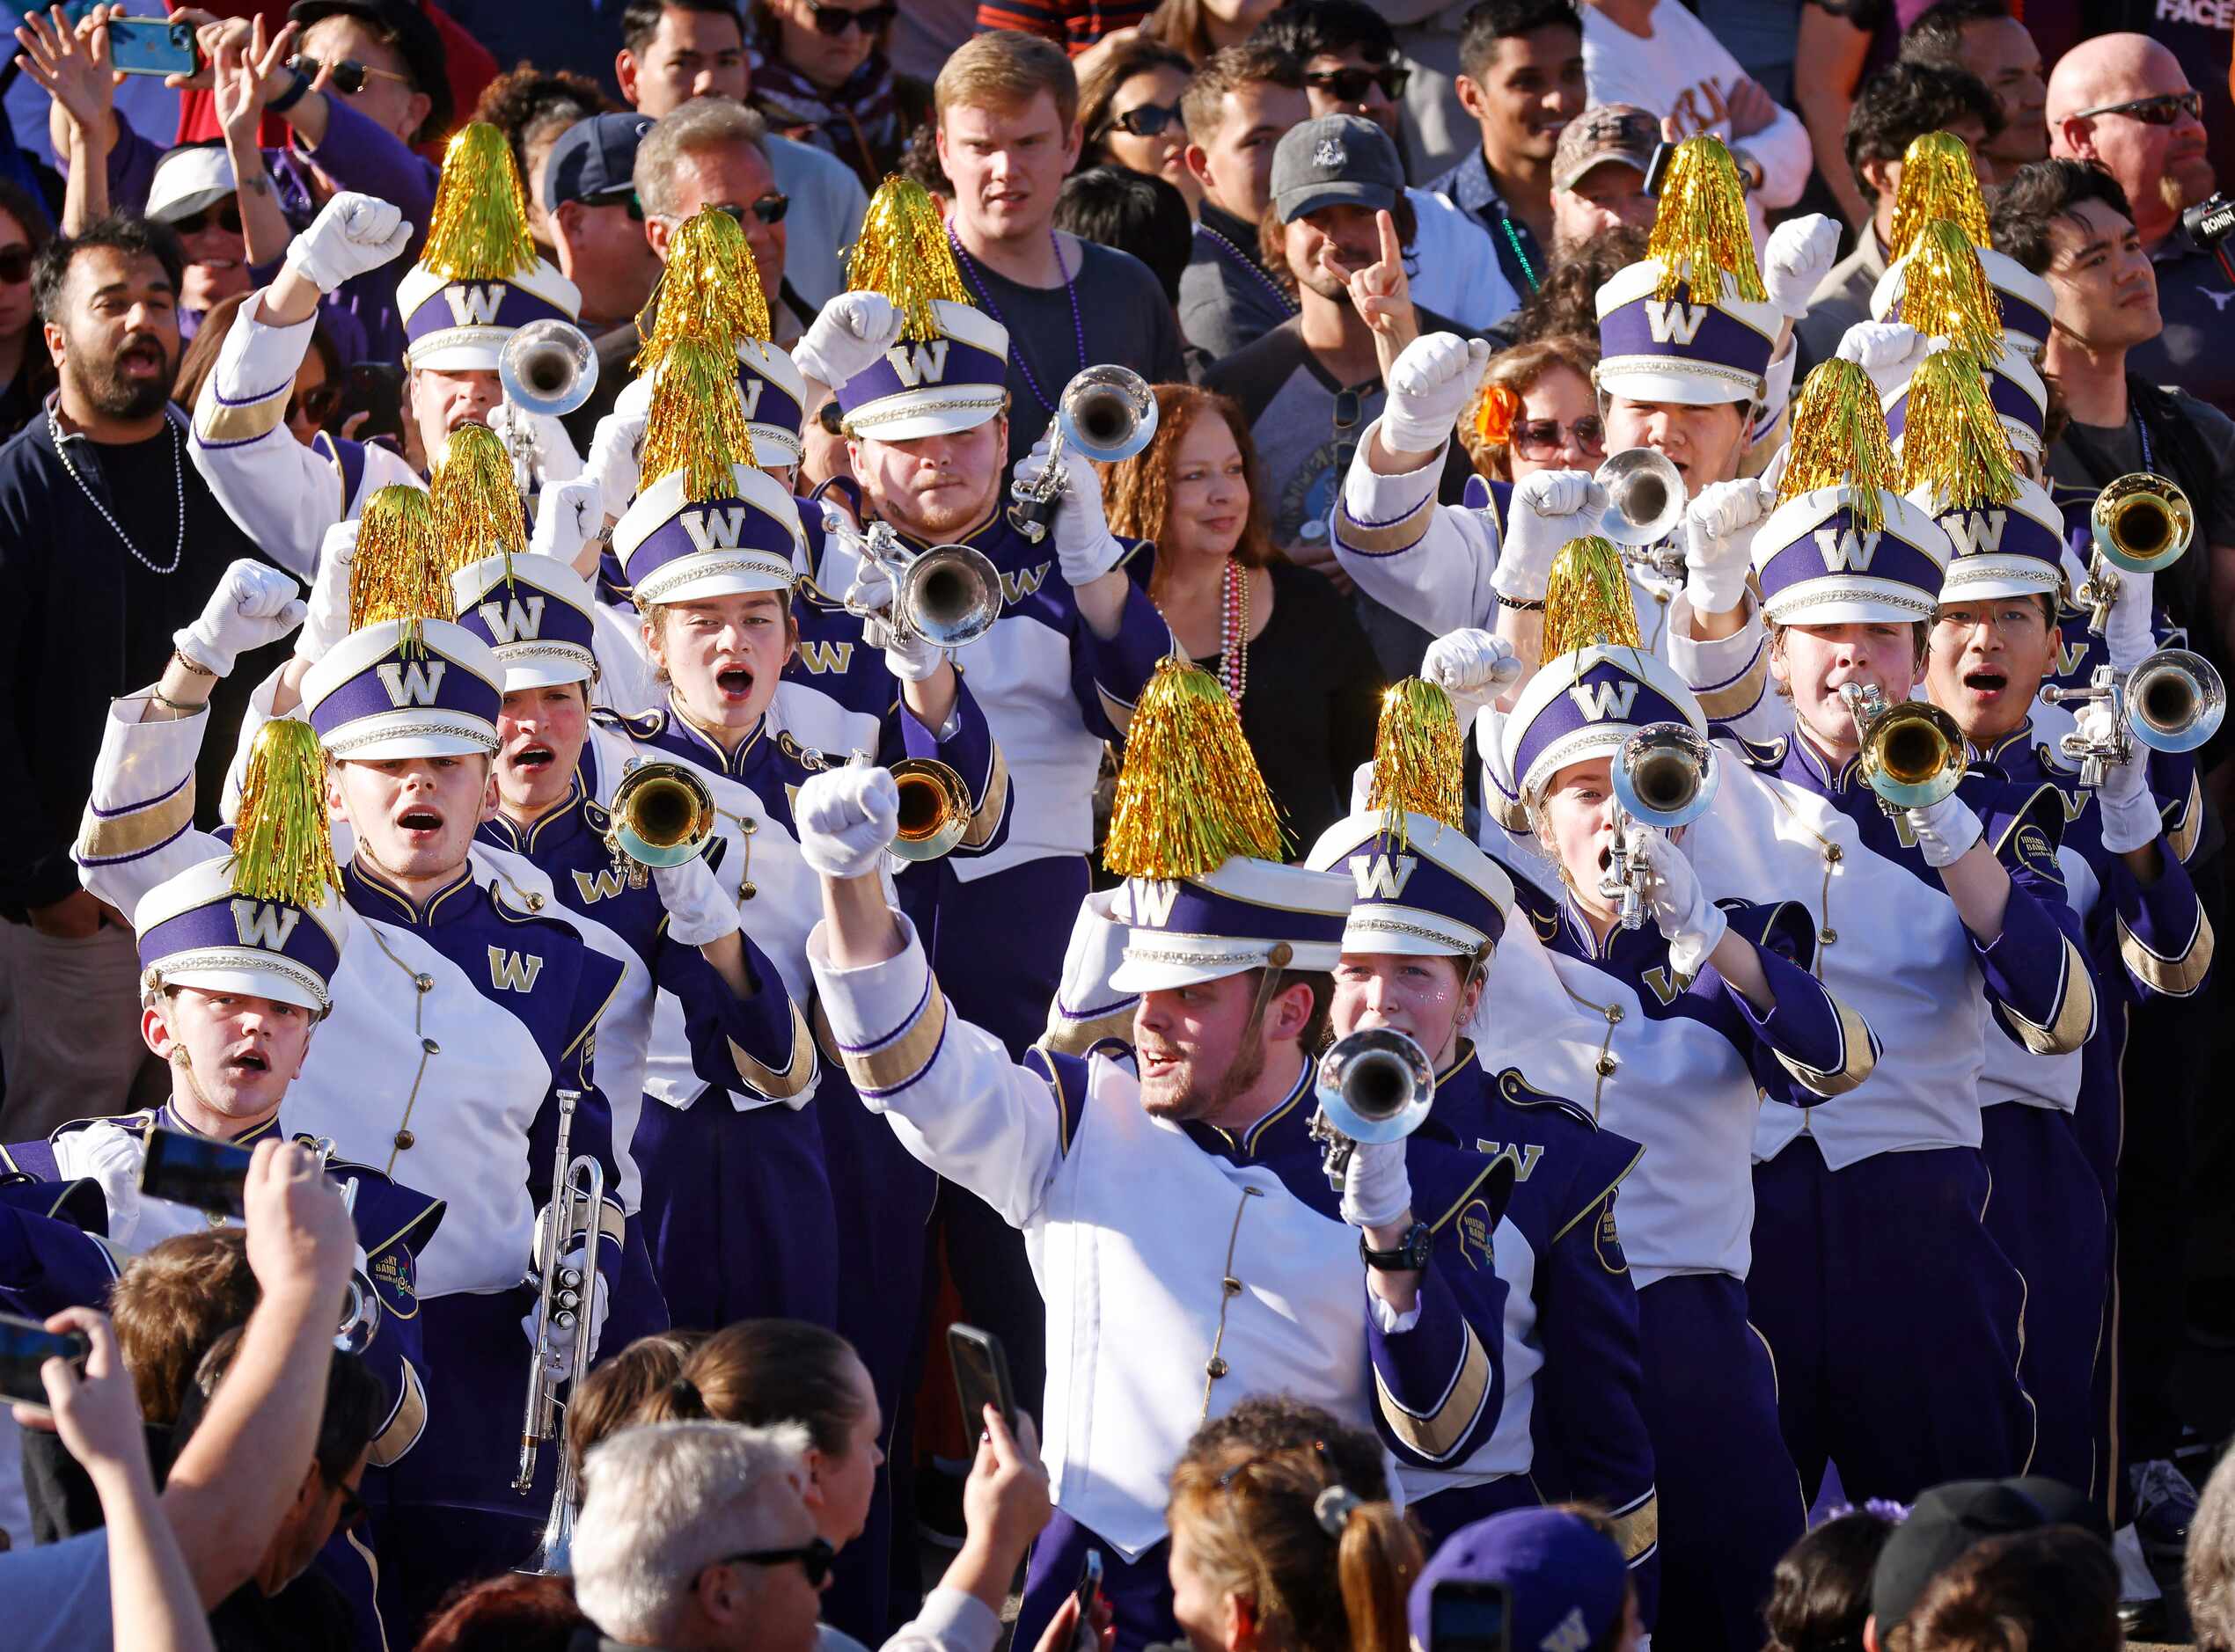 The University of Washington Husky Marching Band cheers as they perform in the Mardi...